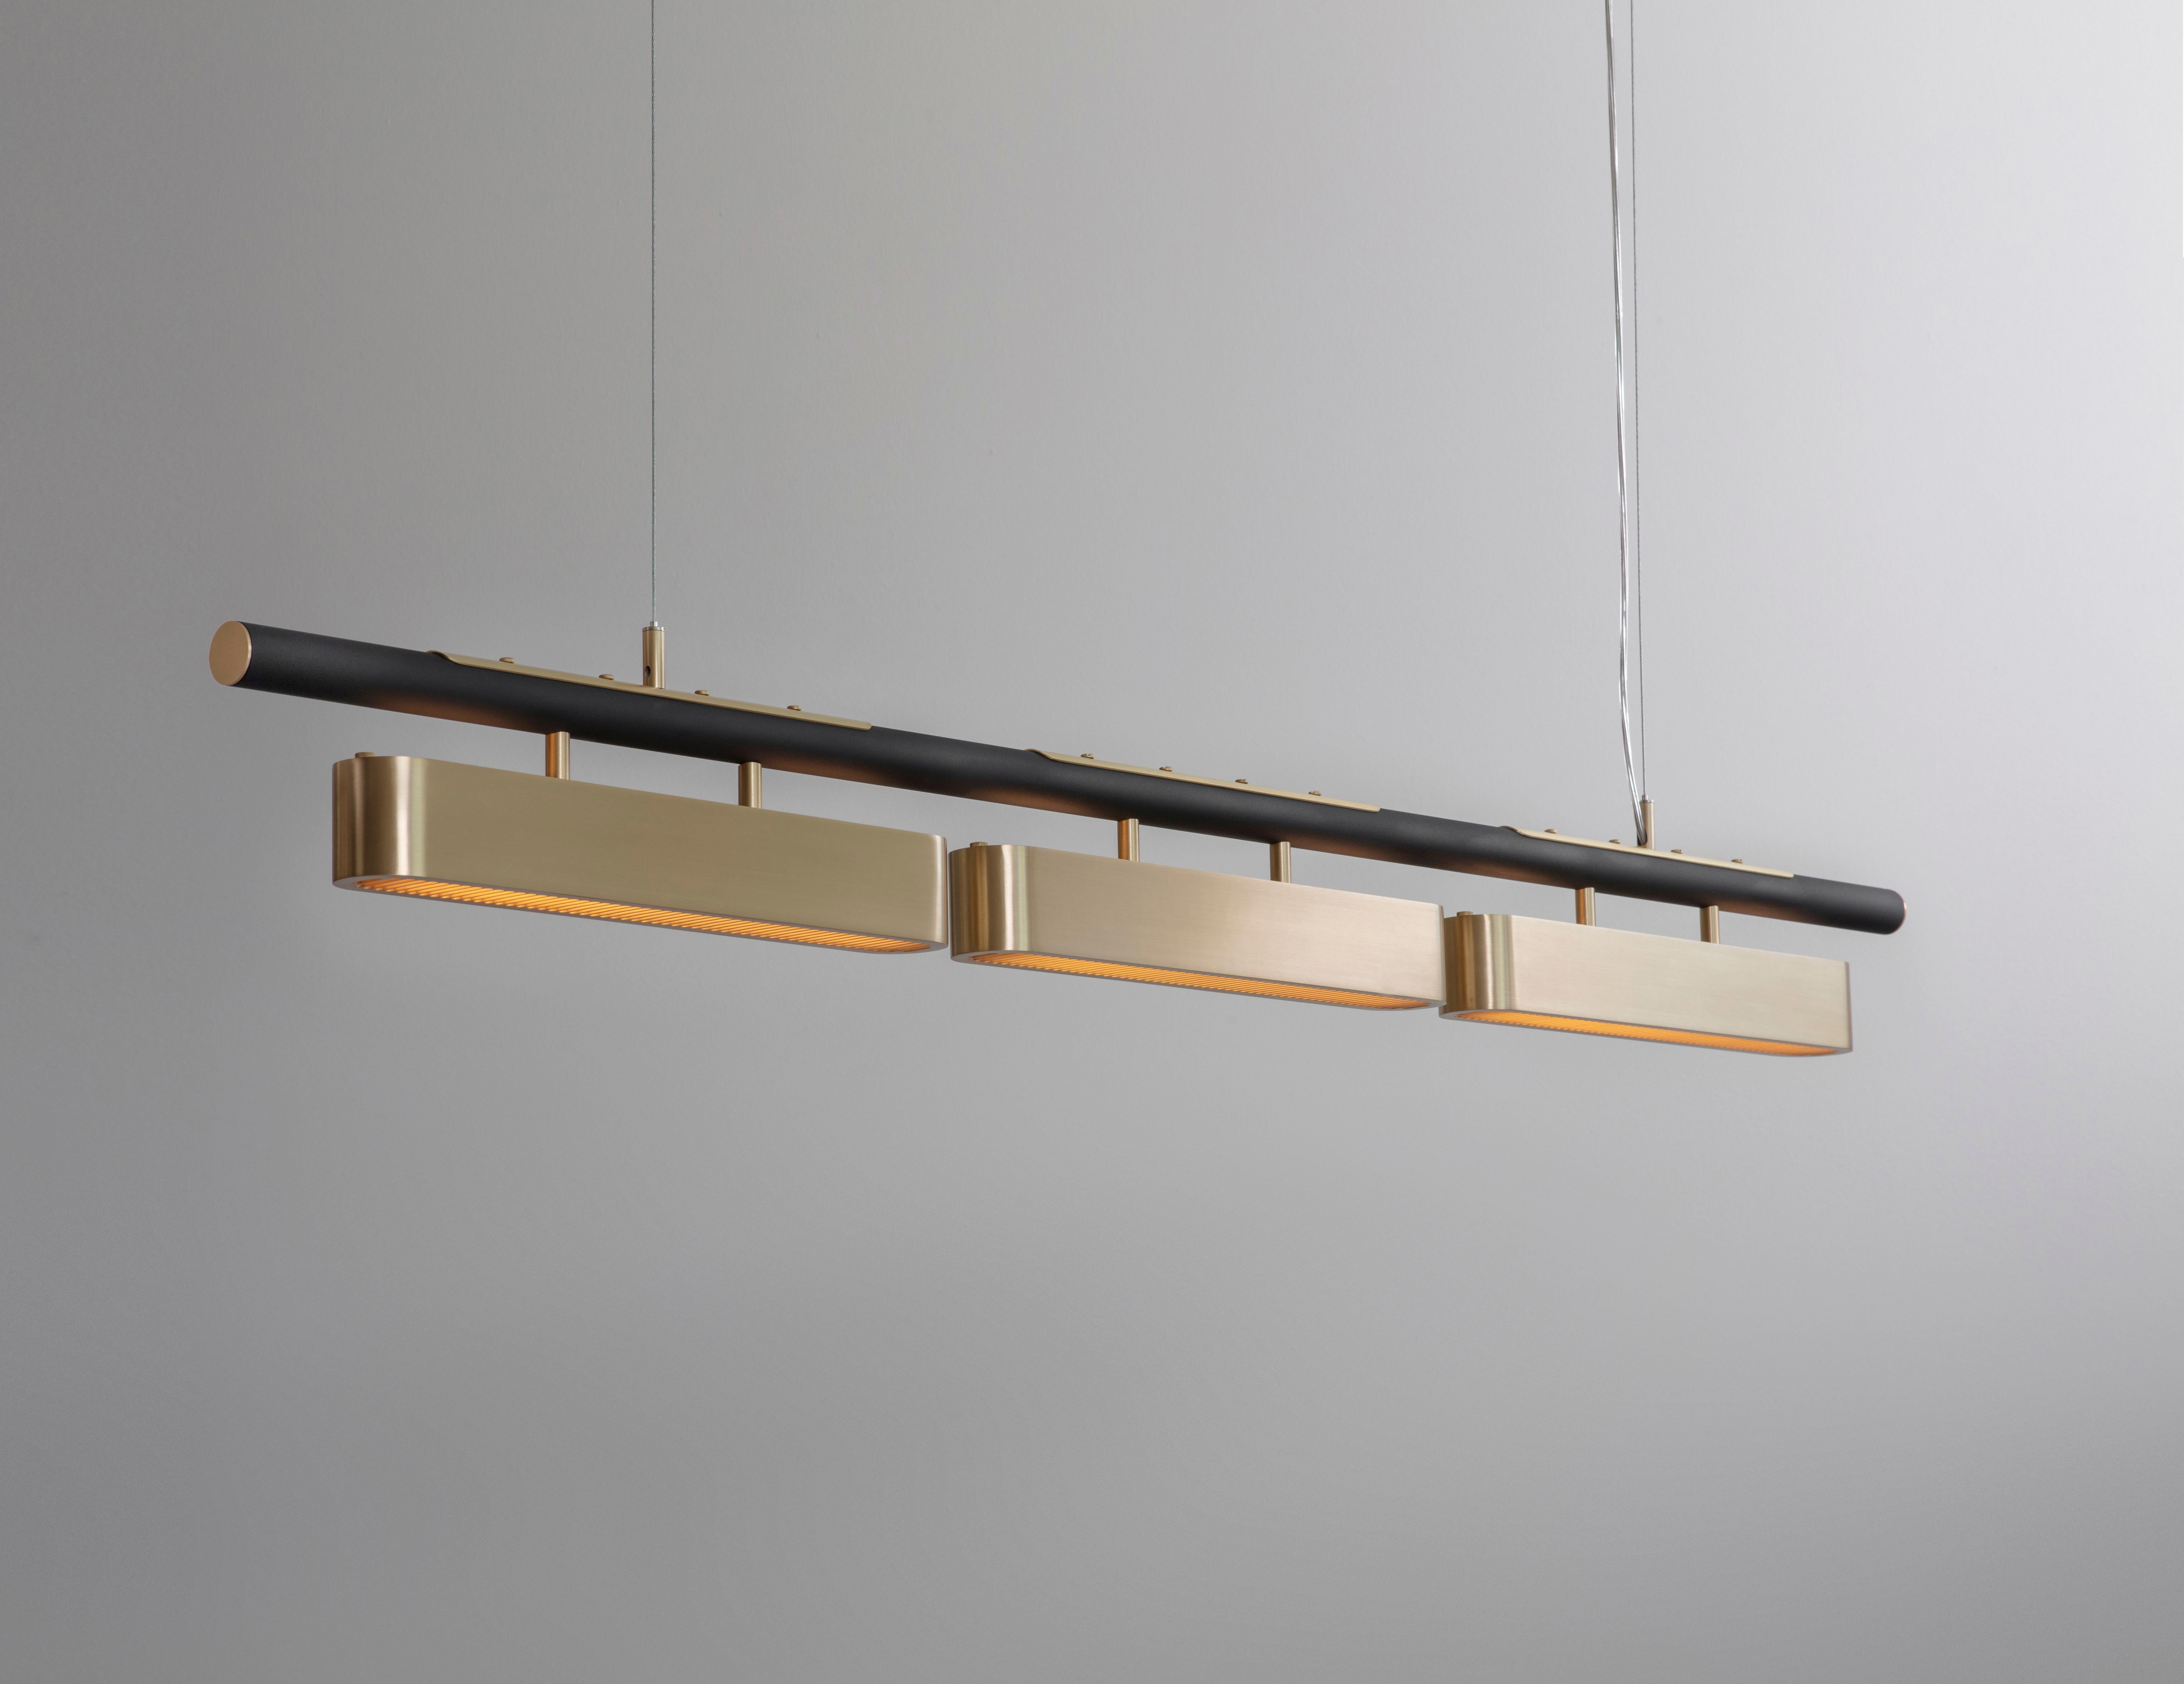 Colt pendant light triple by Bert Frank
Dimensions: 20 x 140 x 12 cm
Materials: Brass, bronze 

Brushed brass lacquered as standard, custom finishes available
All our lamps can be wired according to each country. If sold to the USA it will be